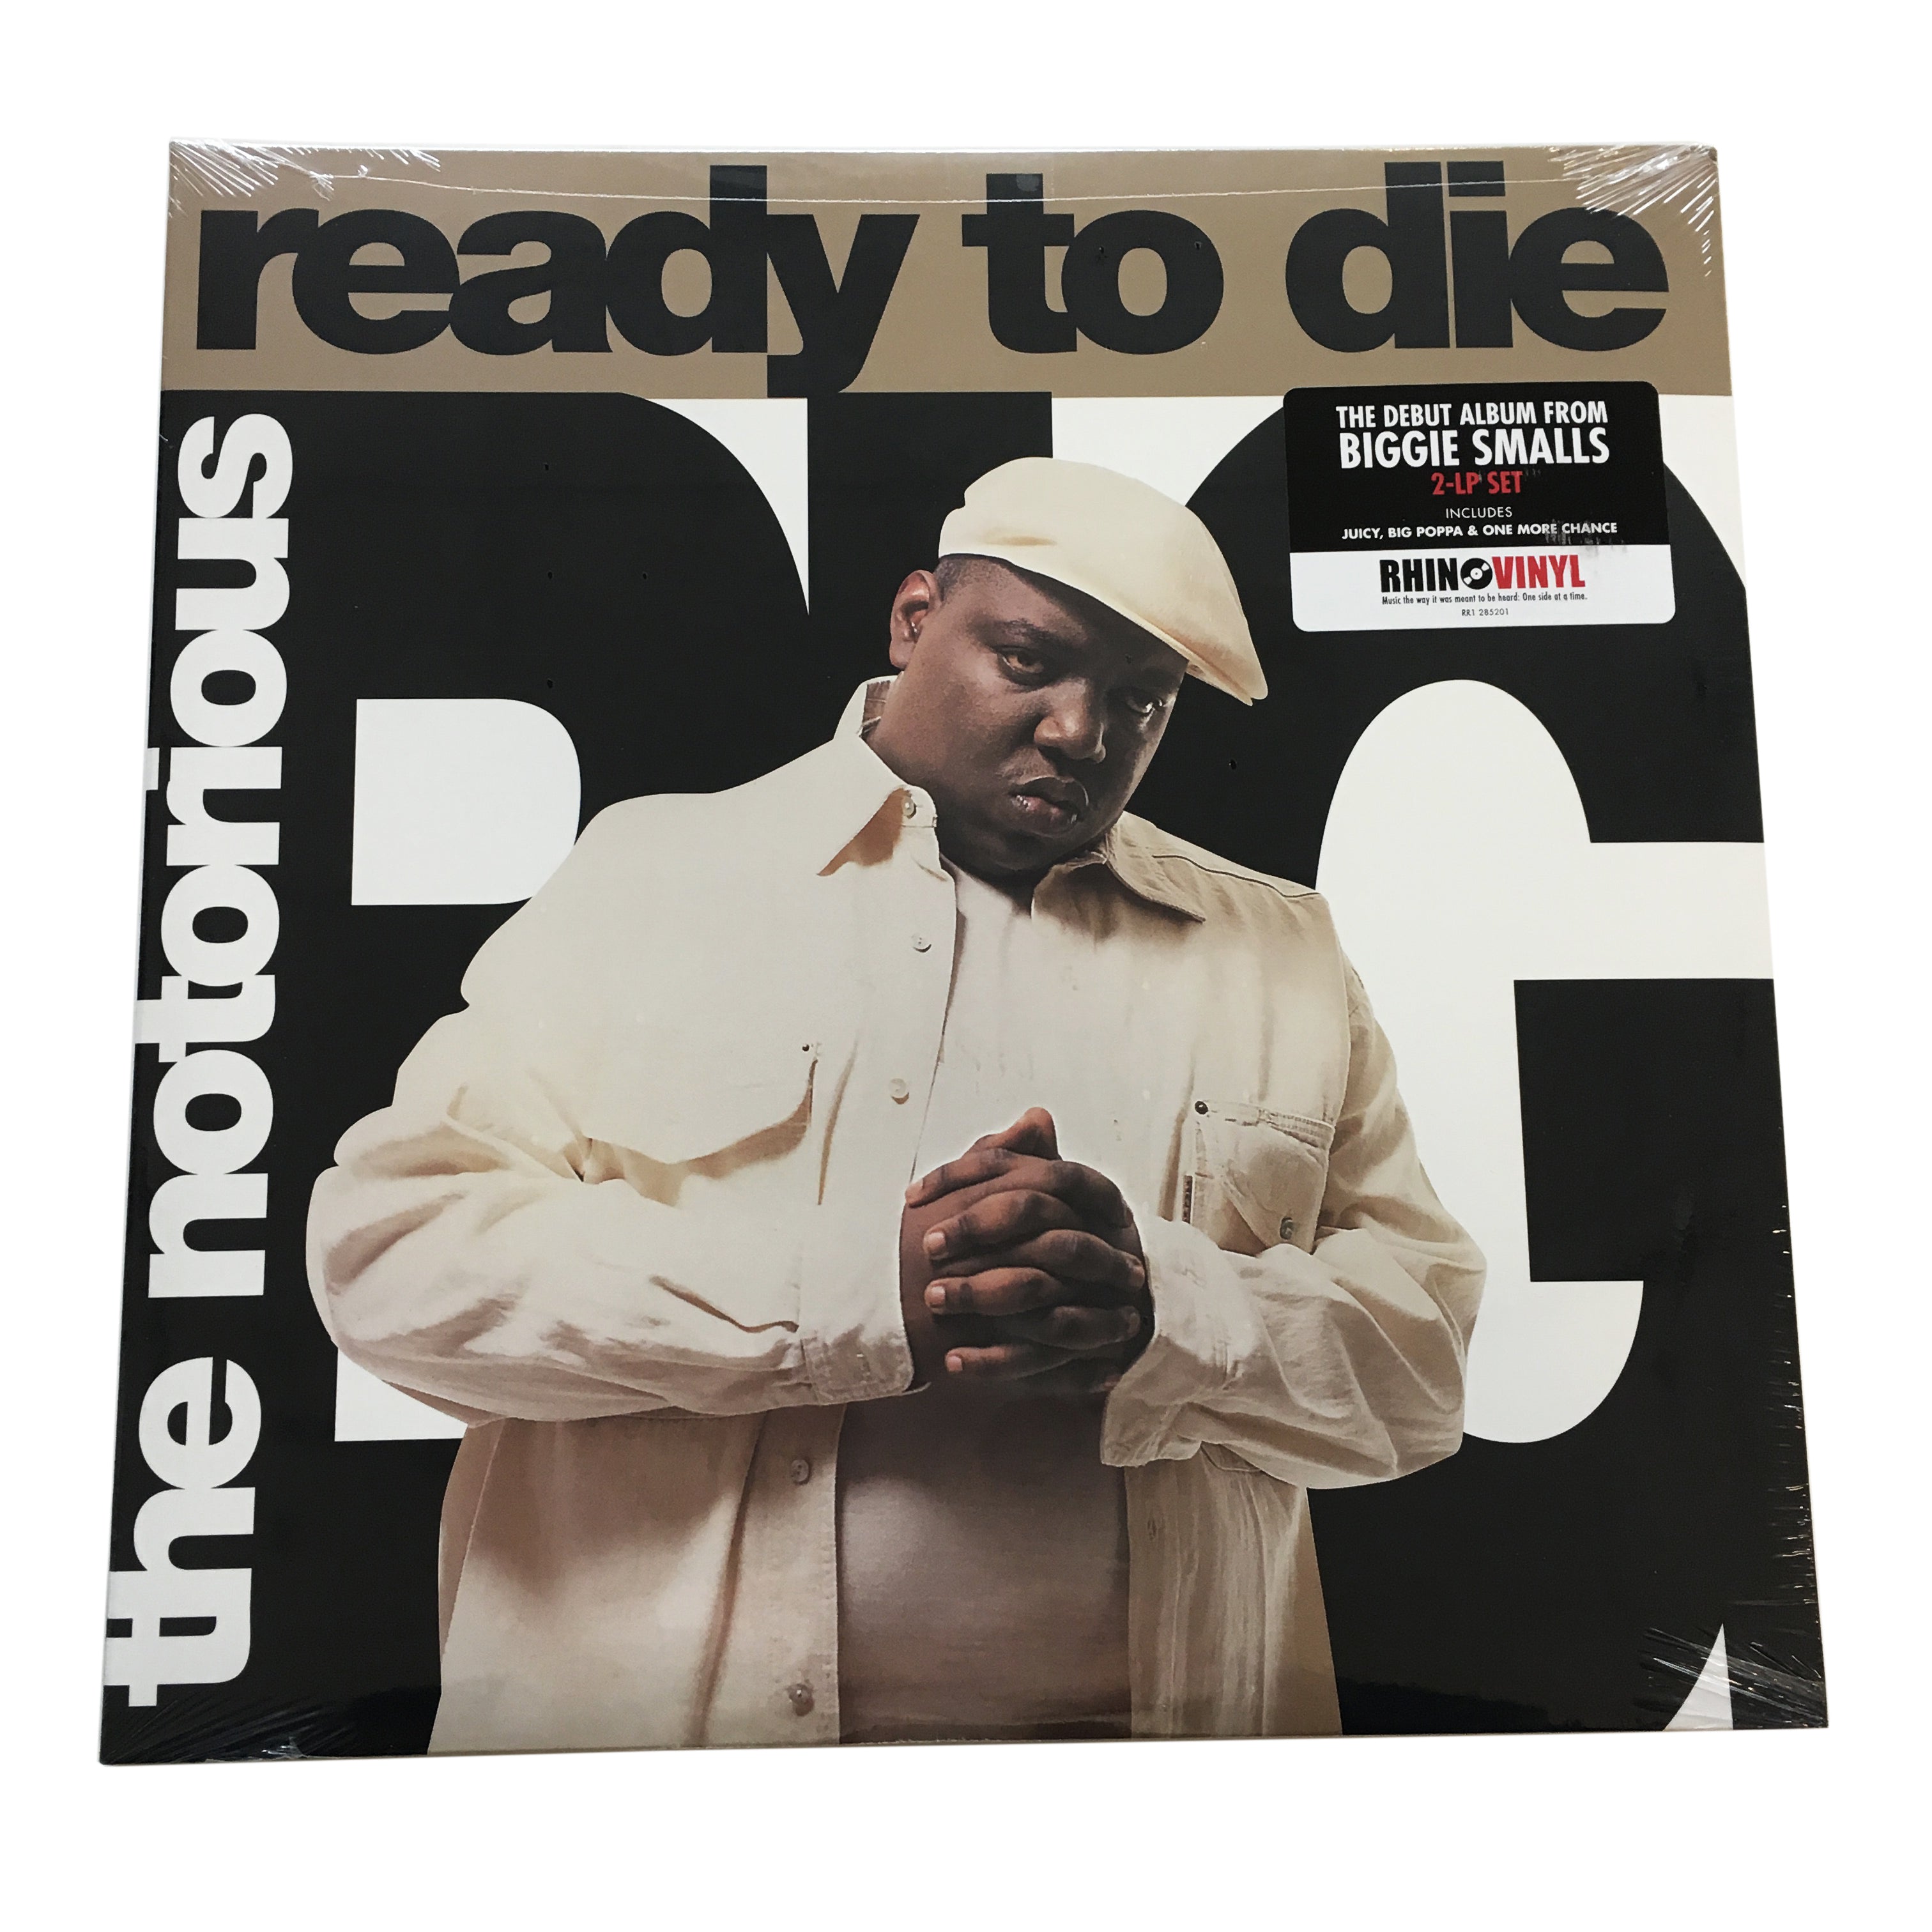 the notorious big ready to die